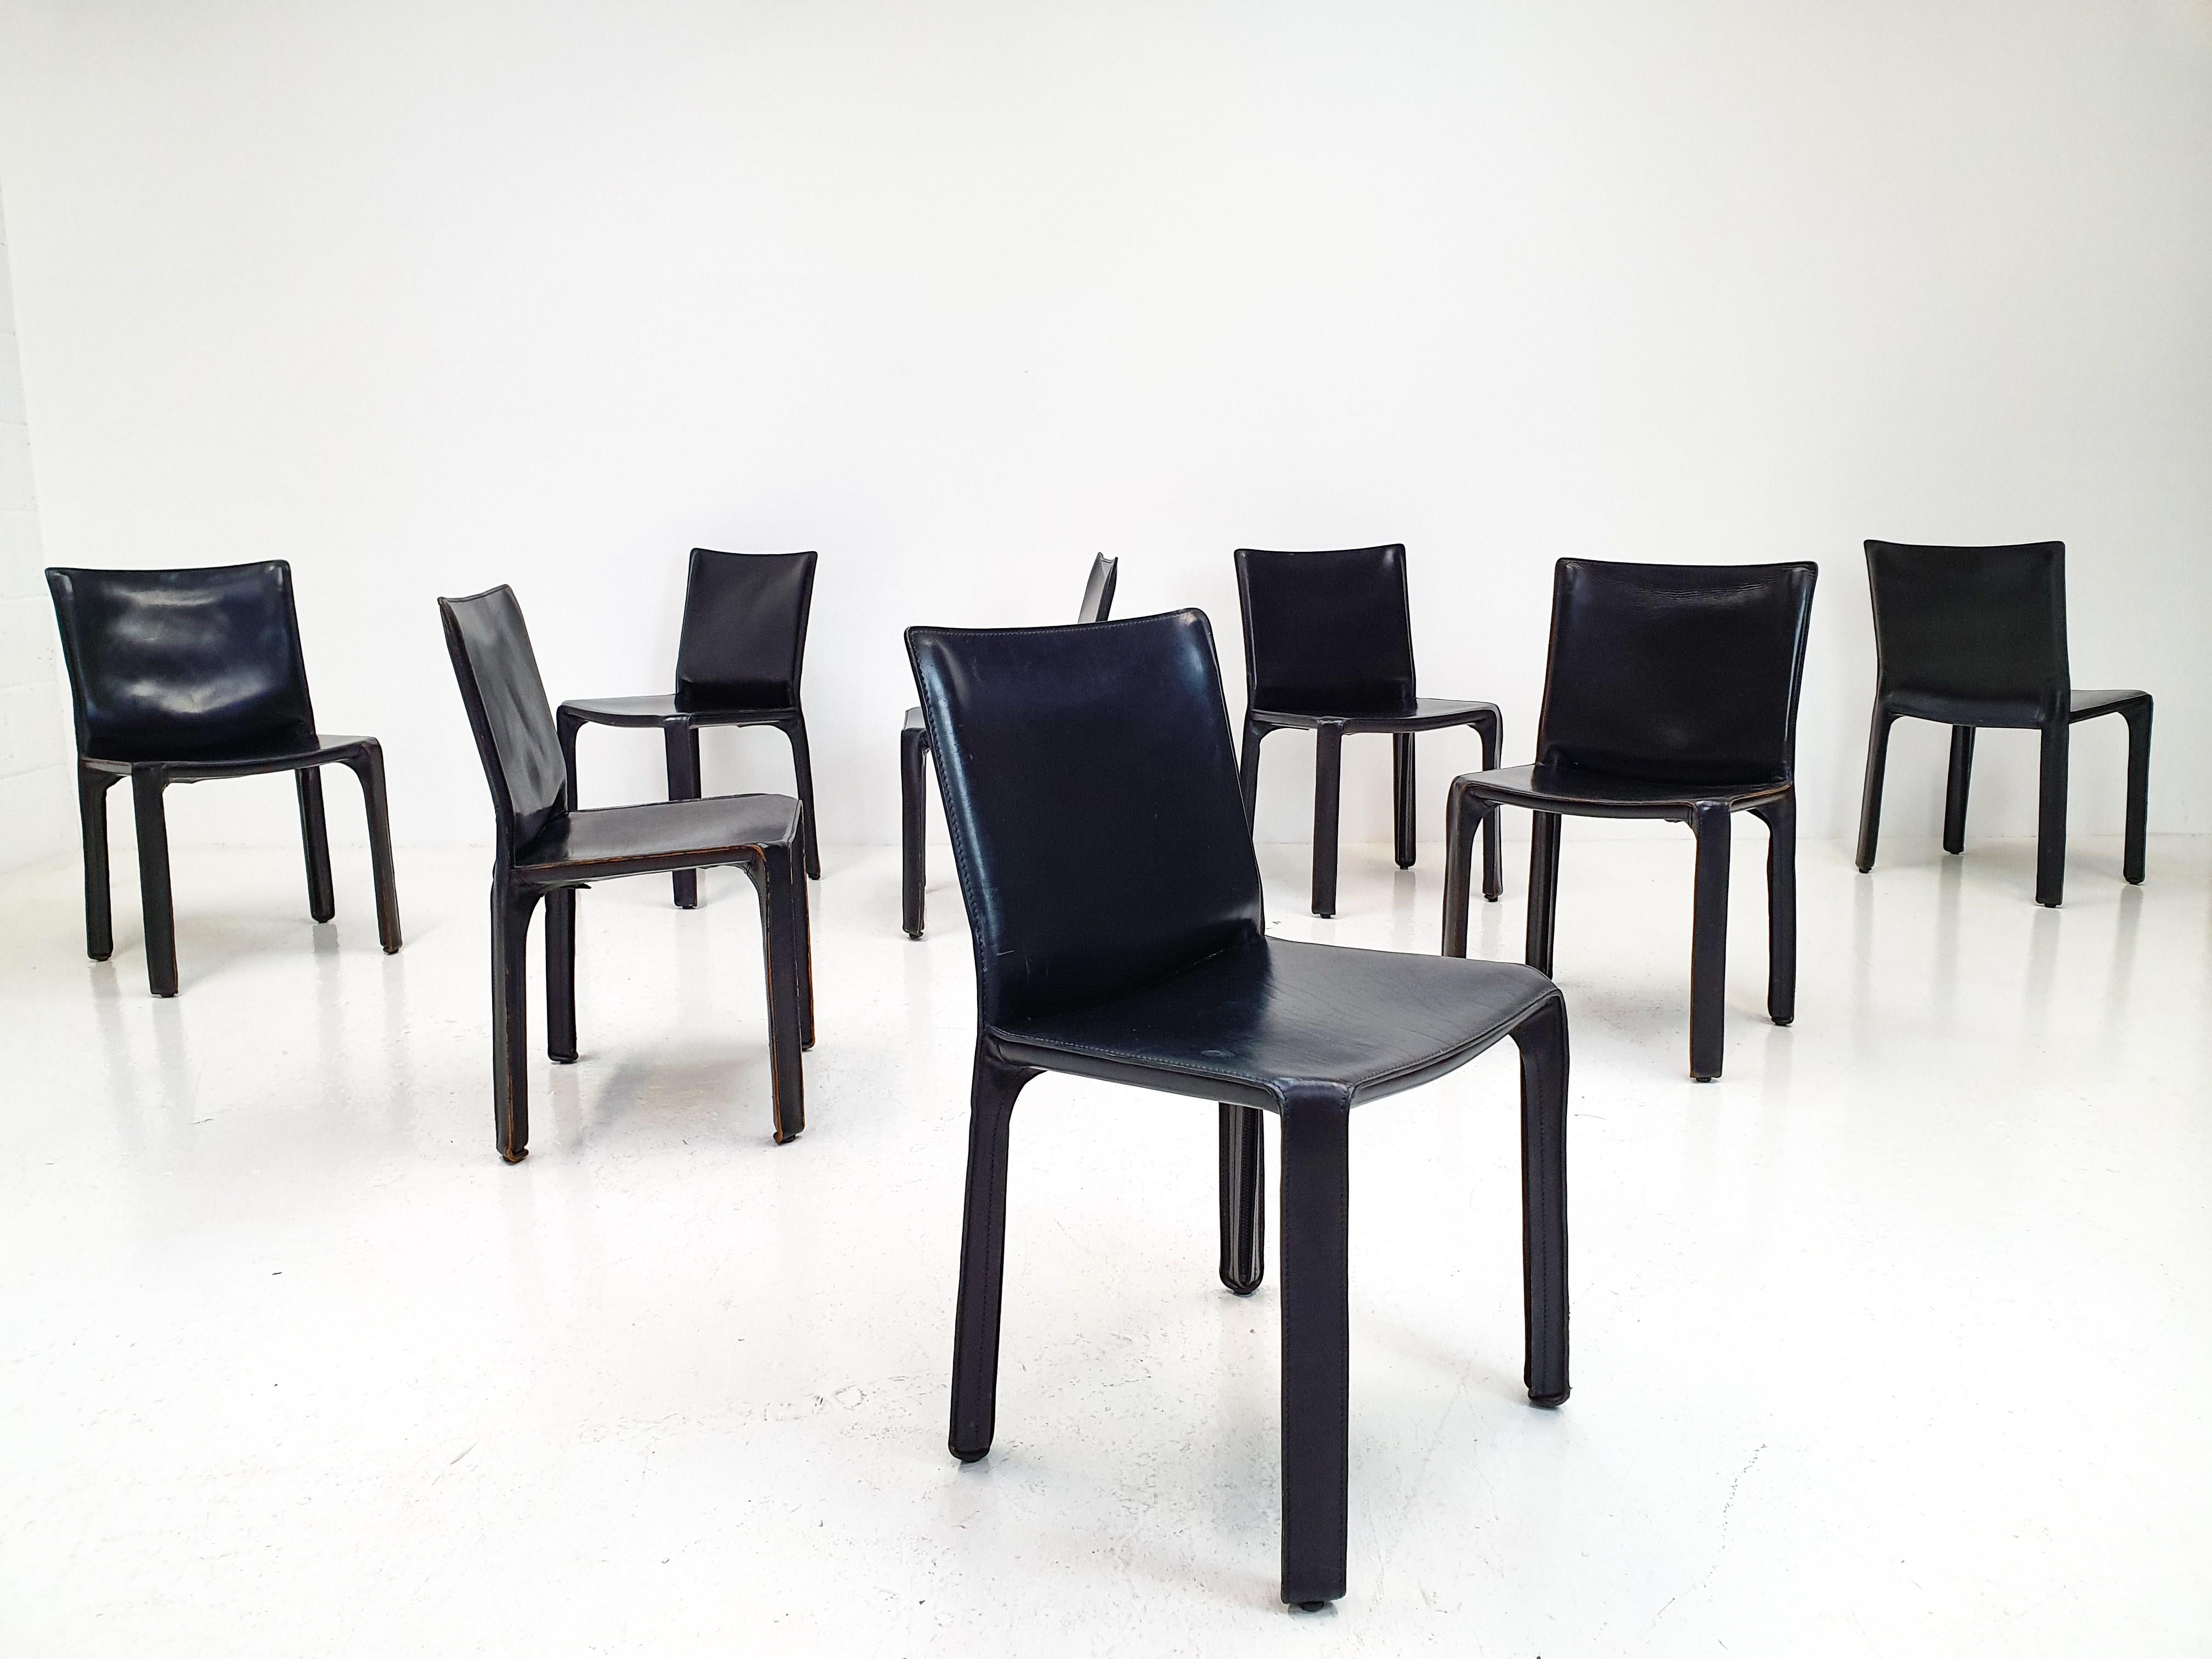 Set of 8 Mario Bellini Leather CAB Chairs in Black for Cassina, 1977, Italy 6